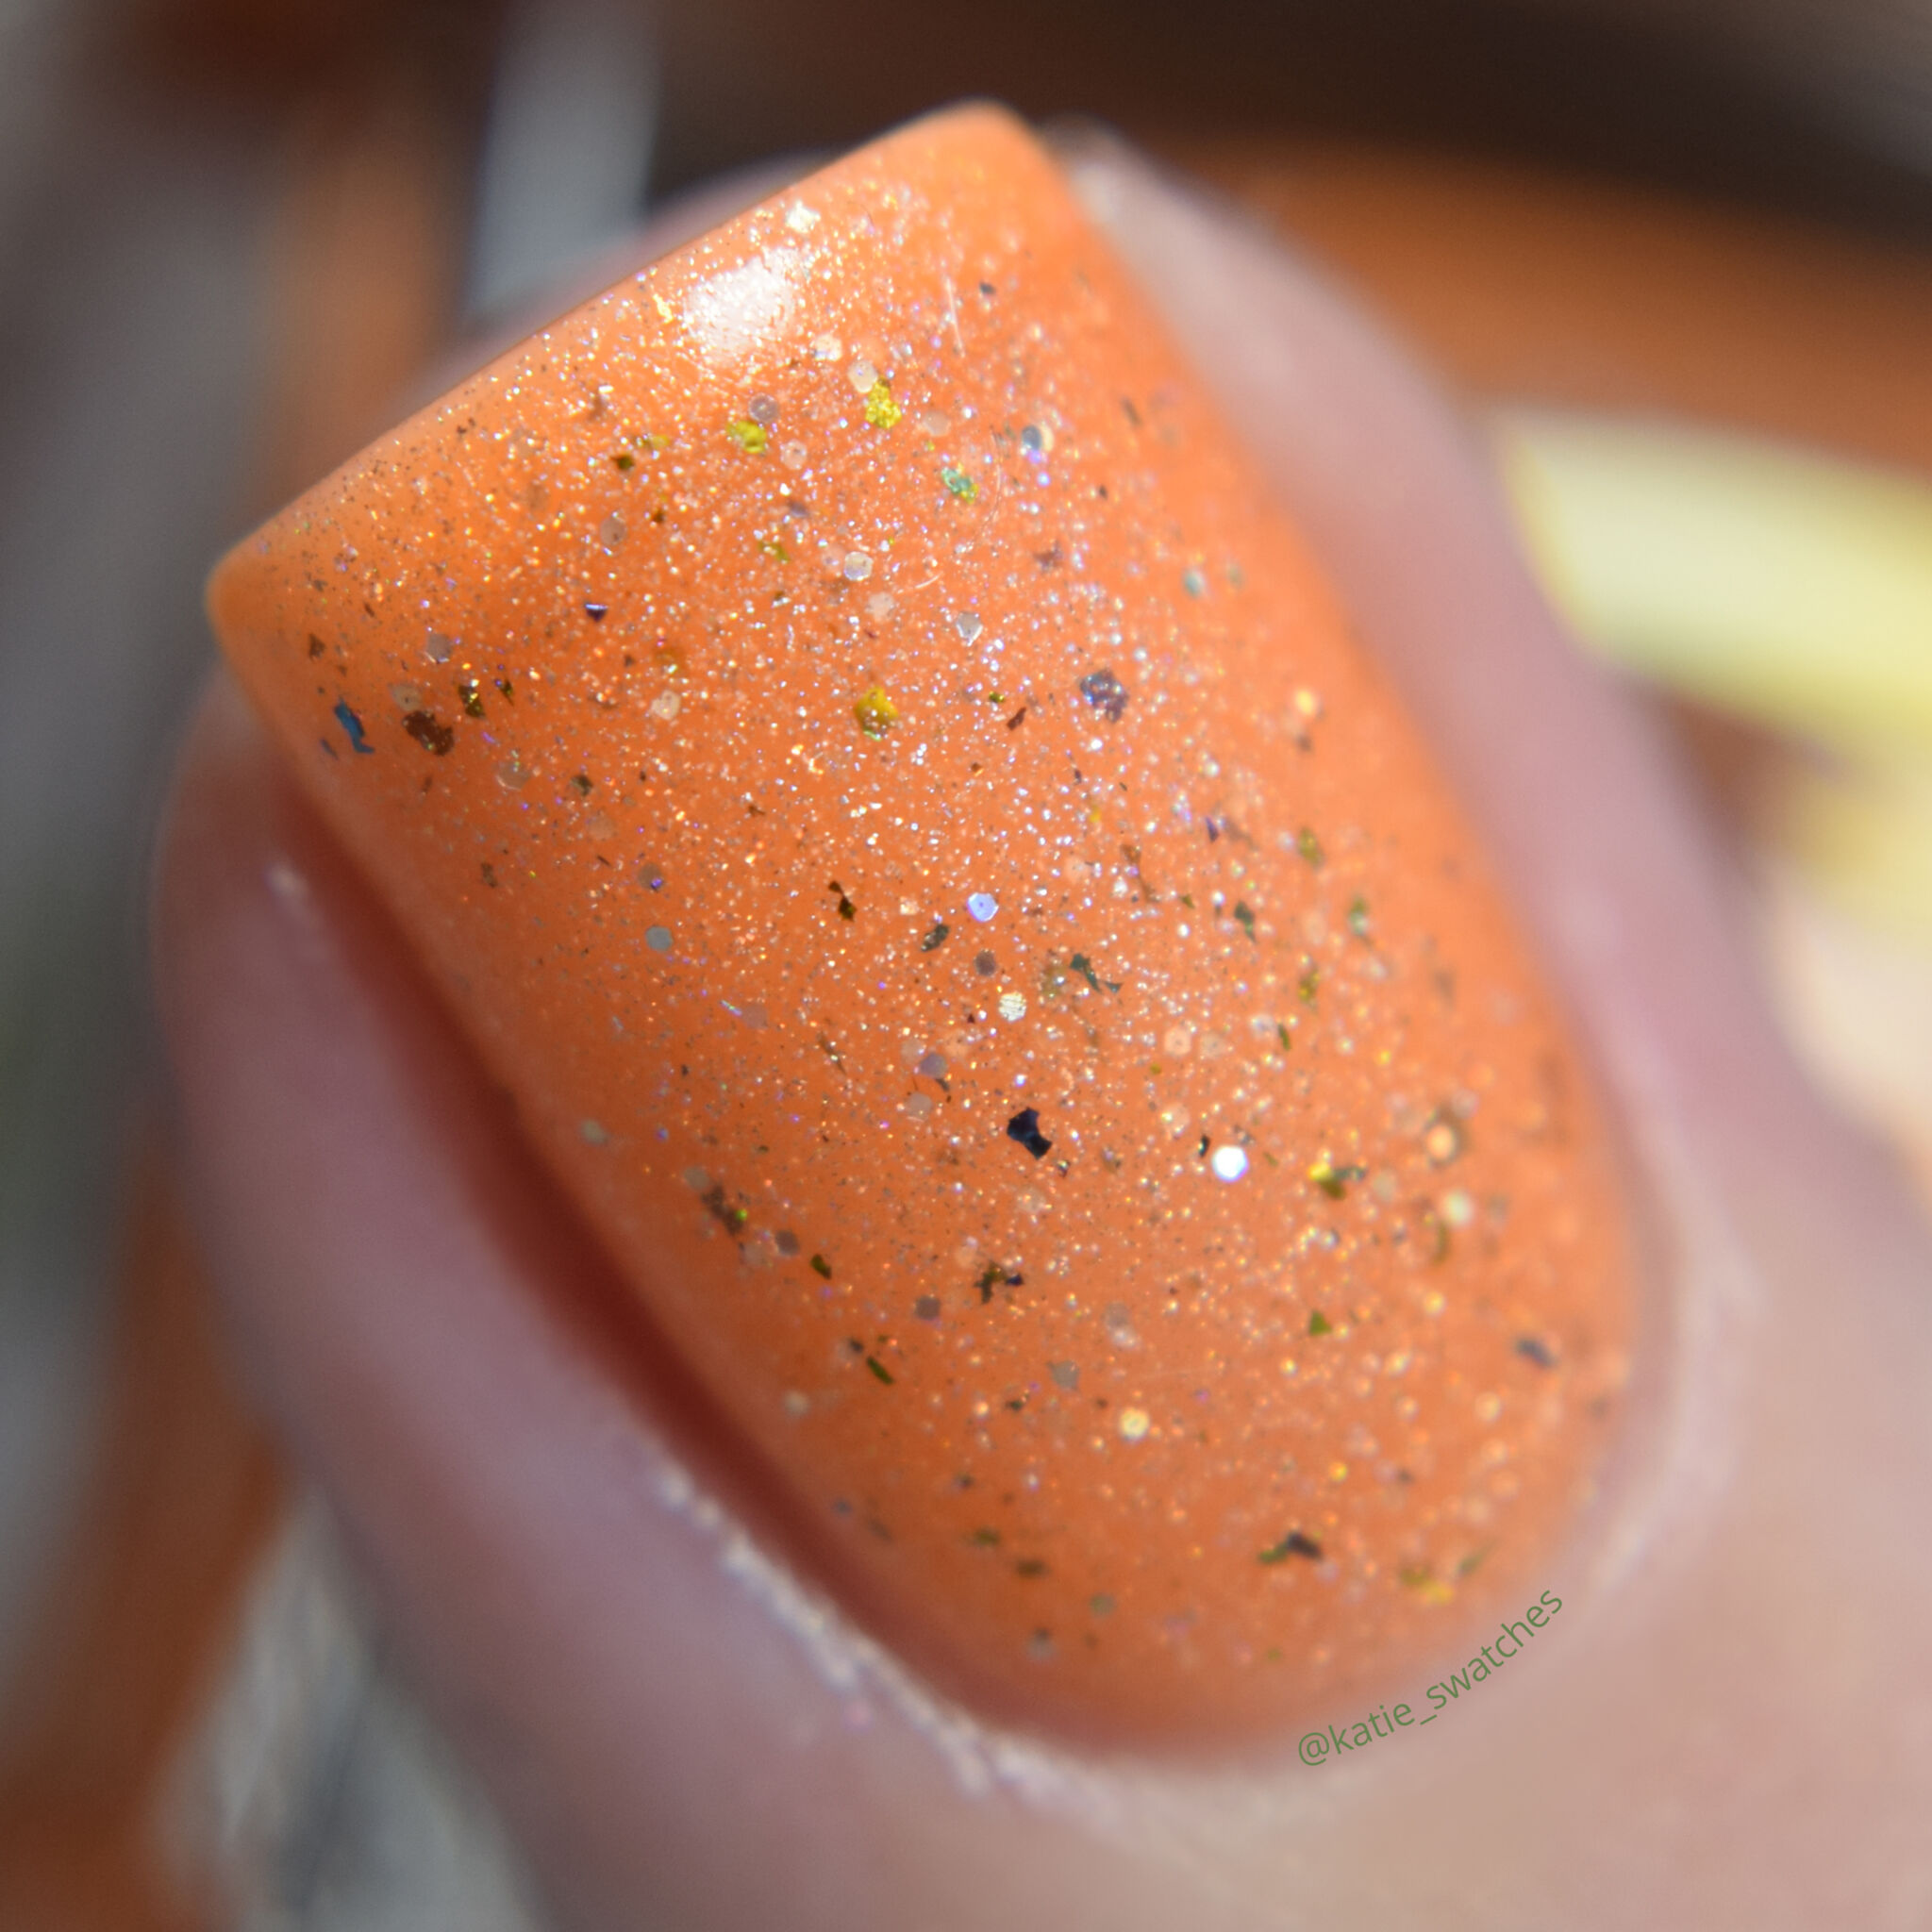 Zombie Claw Polish - Canadian Zombie orange jelly holographic nail polish swatch - Indie Expo Canada IEC VIP Bag 2019 Exclusive